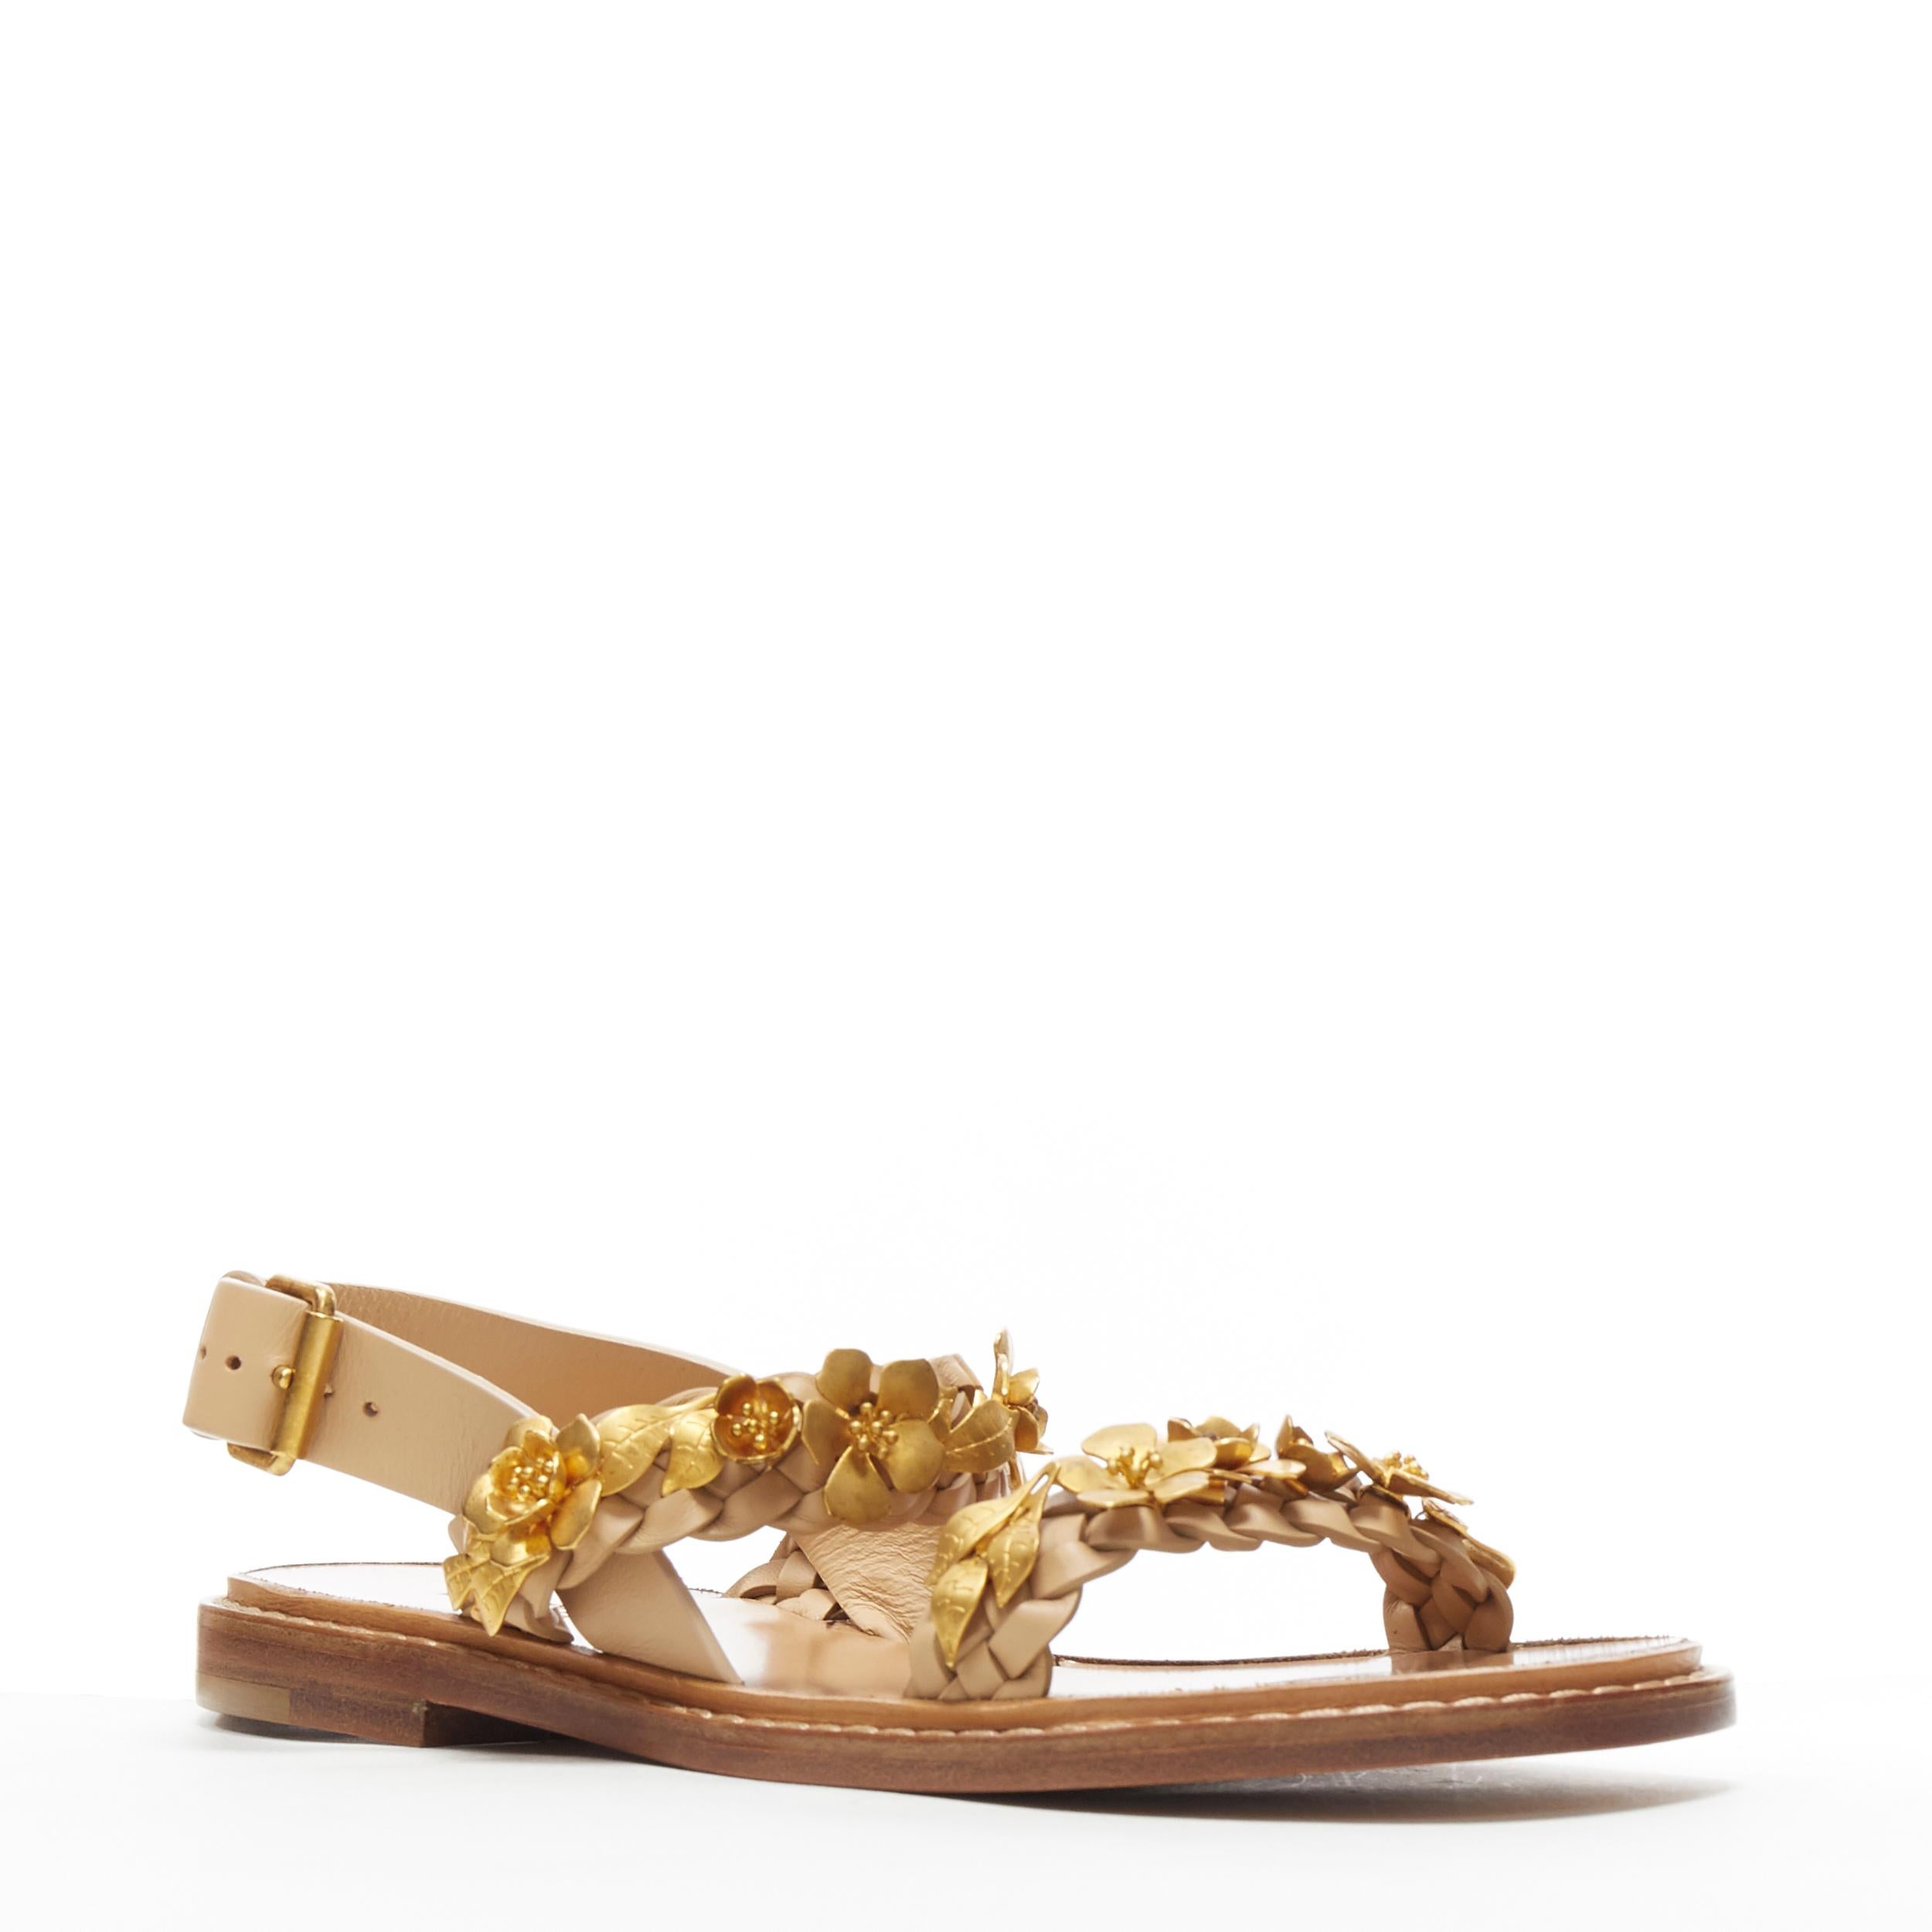 new VALENTINO tan brown braided gold metal flower embellished sandals EU35.5
Brand: Valentino
Model Name / Style: Floral sandals
Material: Leather
Color: Brown
Pattern: Floral
Closure: Strap
Extra Detail: Gold-tone floral leaf metal embellishment on